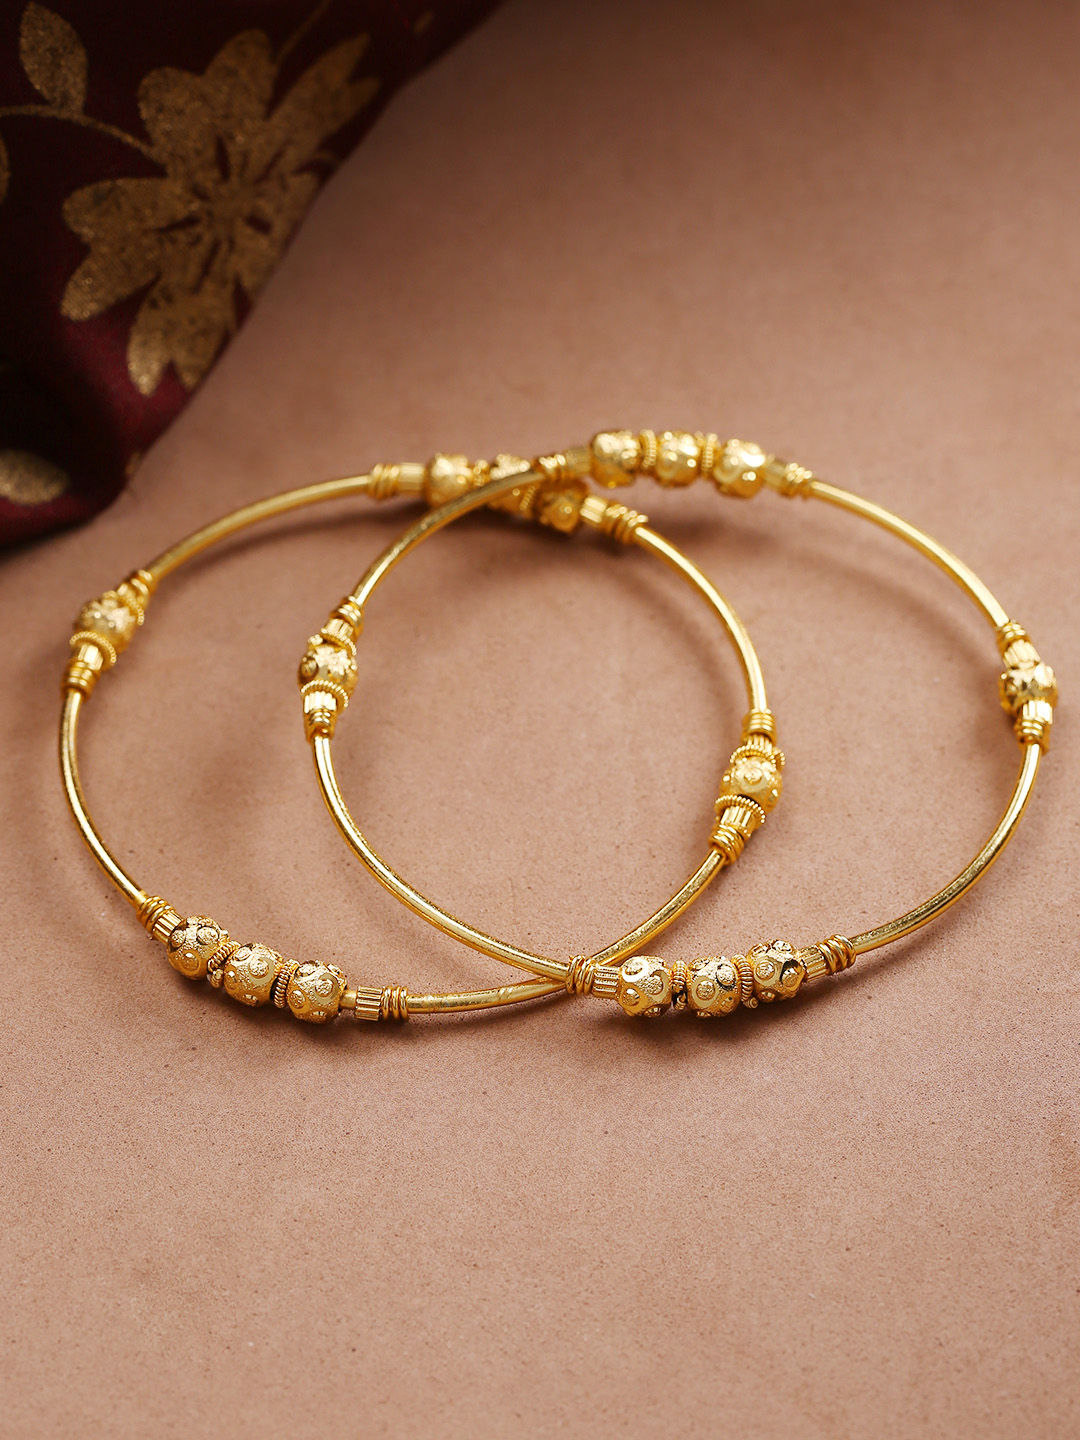 Priyaasi Set Of 2 Antique Gold-Plated Handcrafted Bangles - 2.4